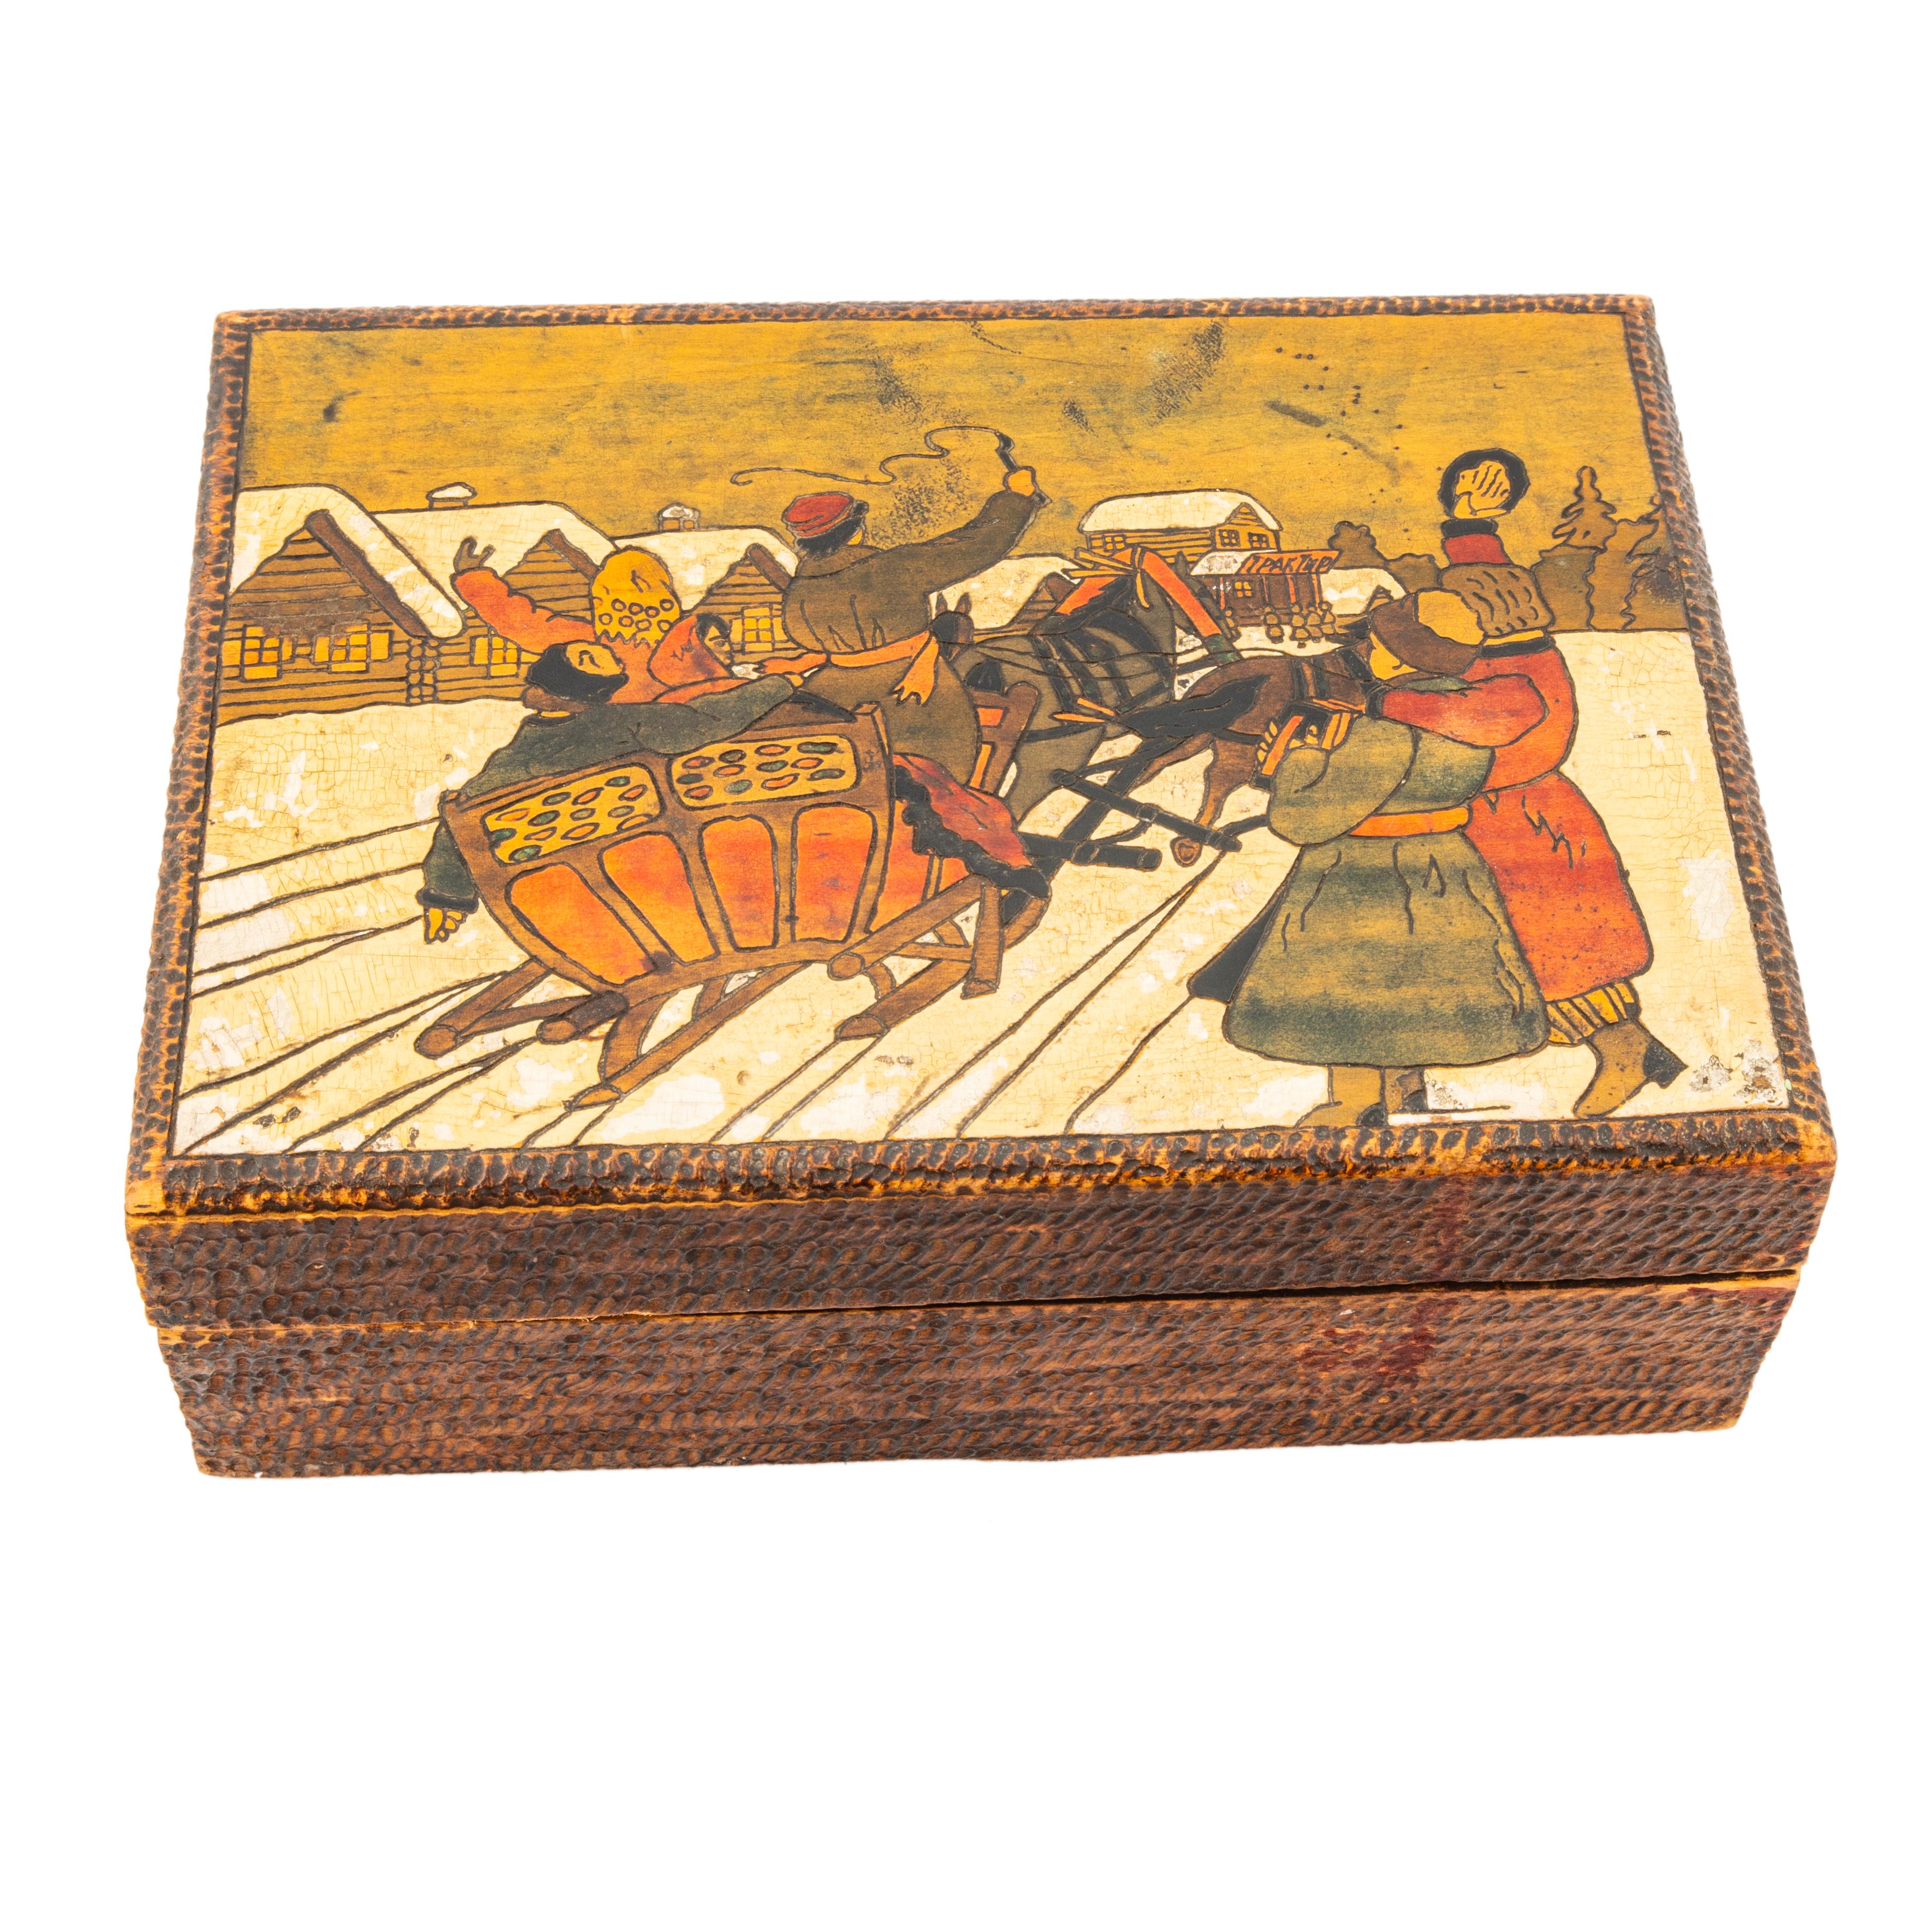 The cover depicting the receding view of a troika pulling a traditional Russian sleigh though a winter landscape, the three charging horses urged along by a coachman with a red hat cracking a whip. Two contented women wrapped in babushki  appear